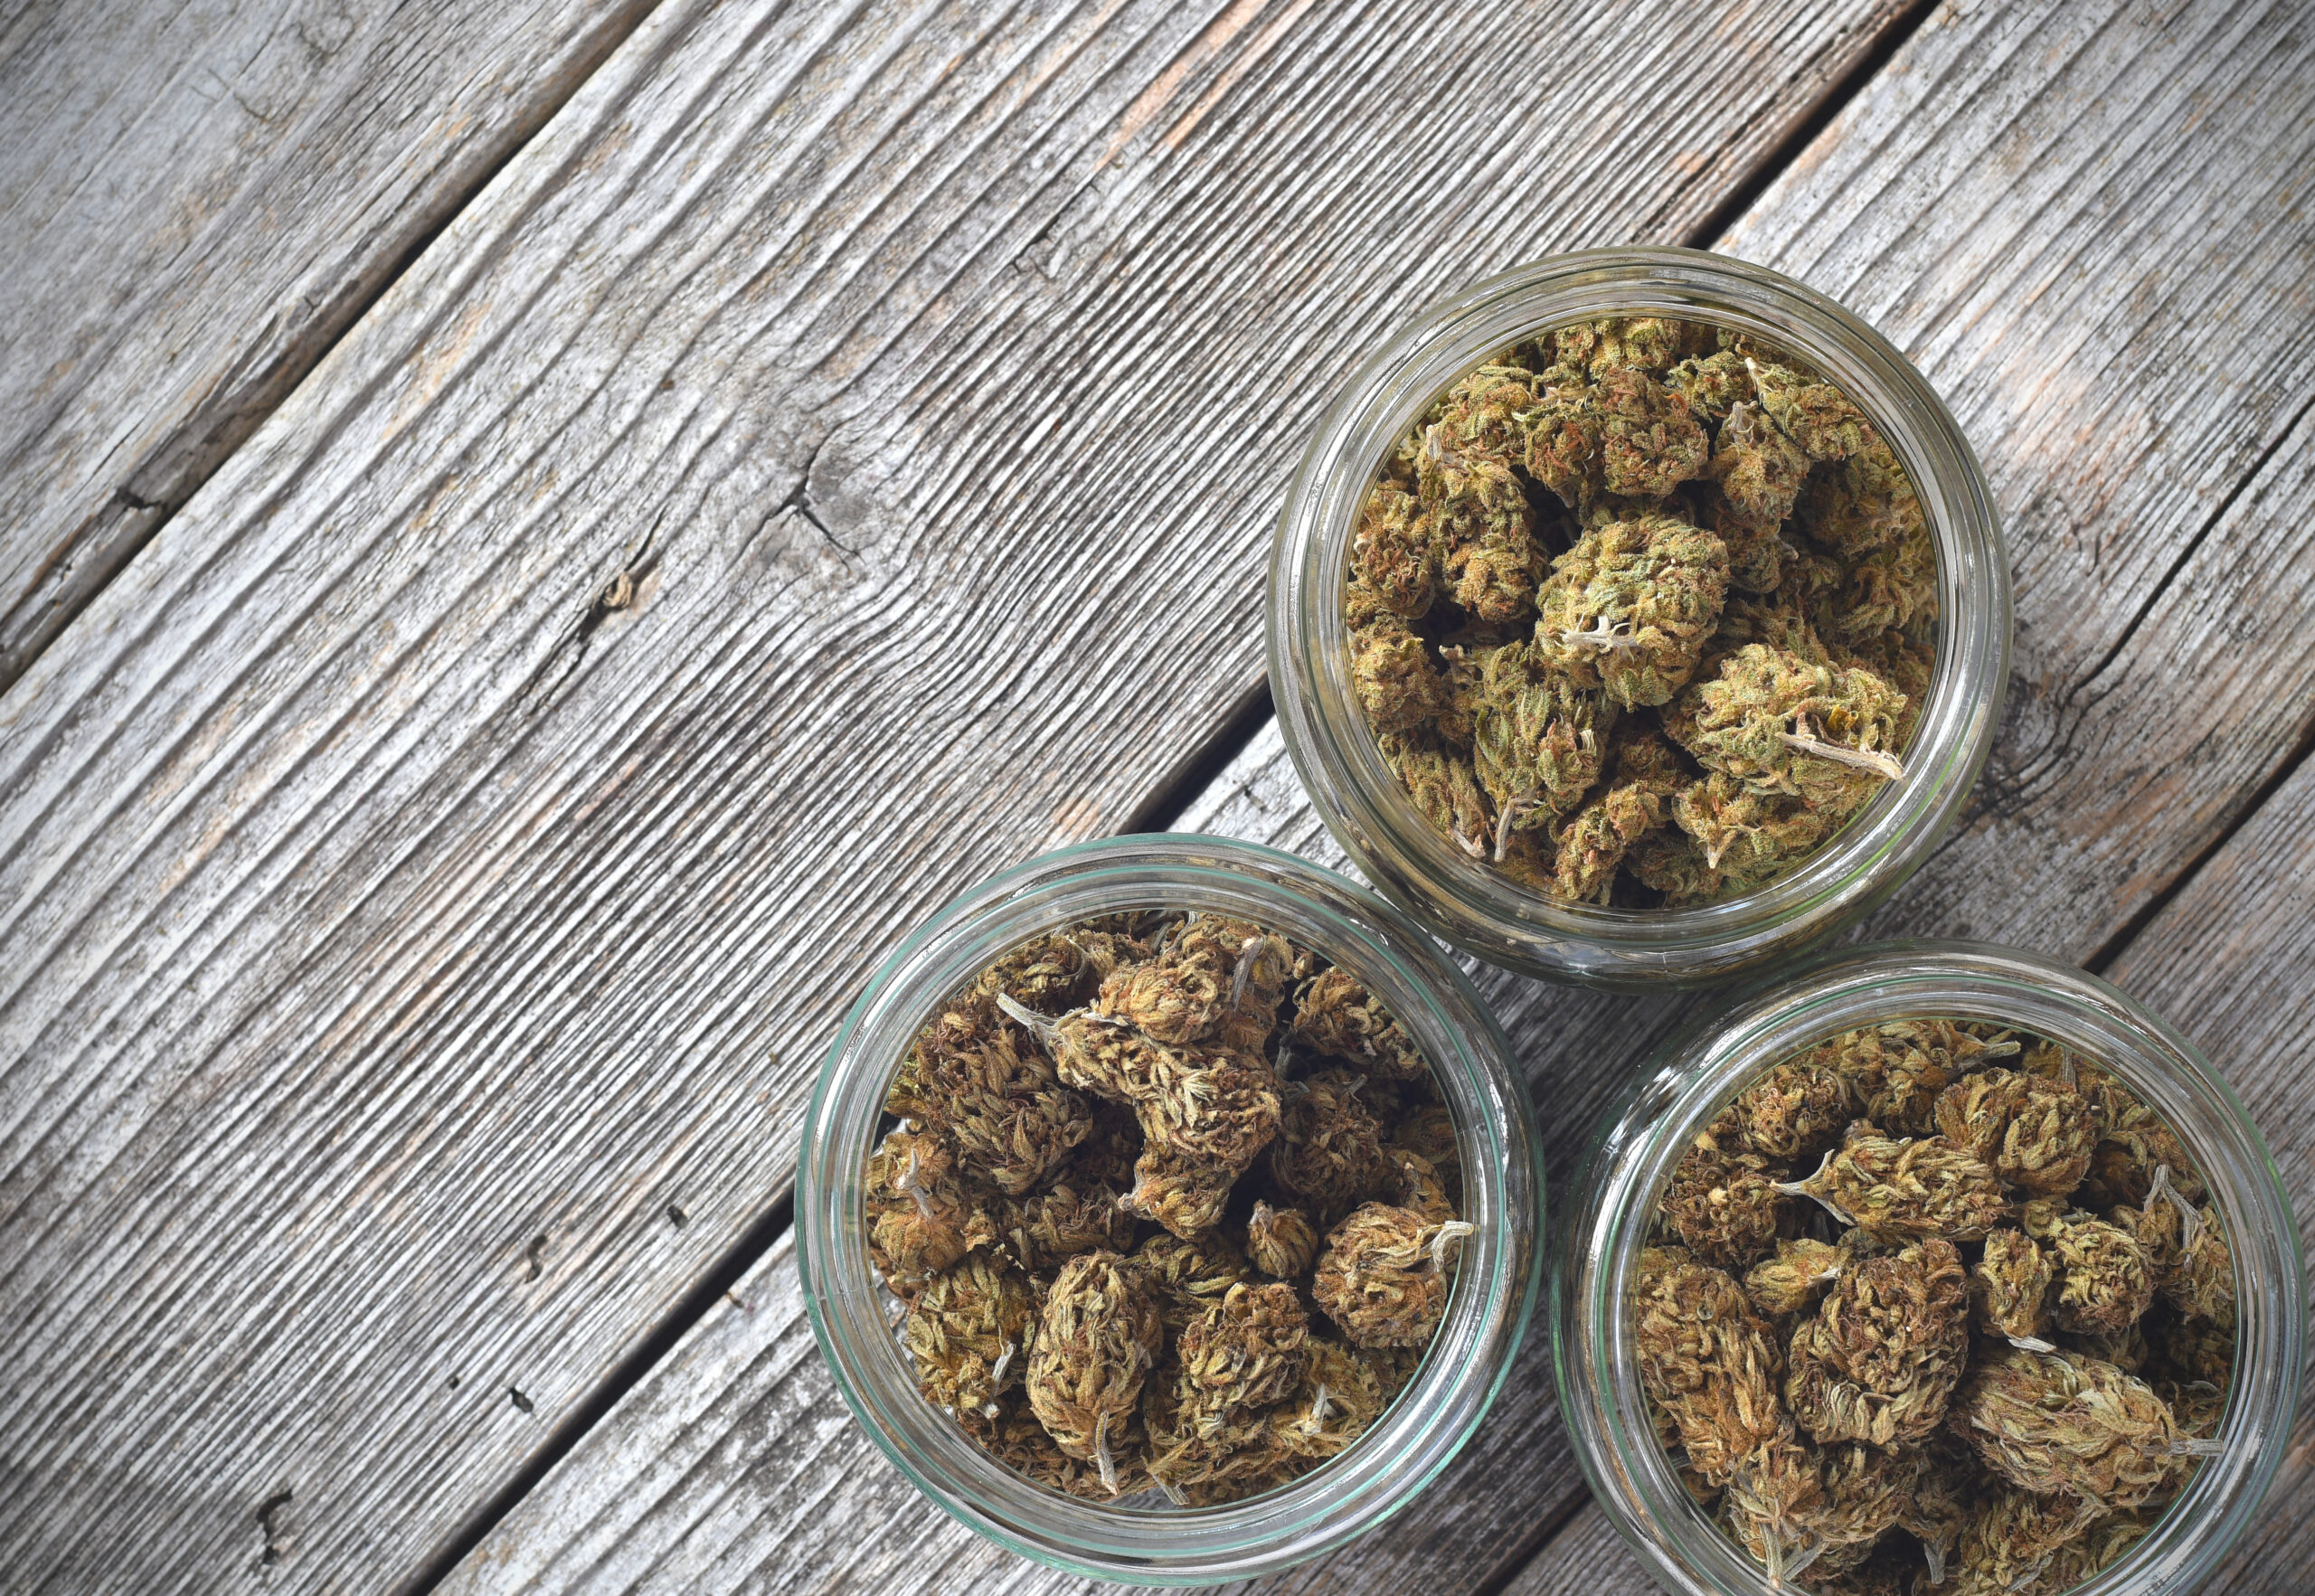 Dry and trimmed cannabis buds stored in a glas jars